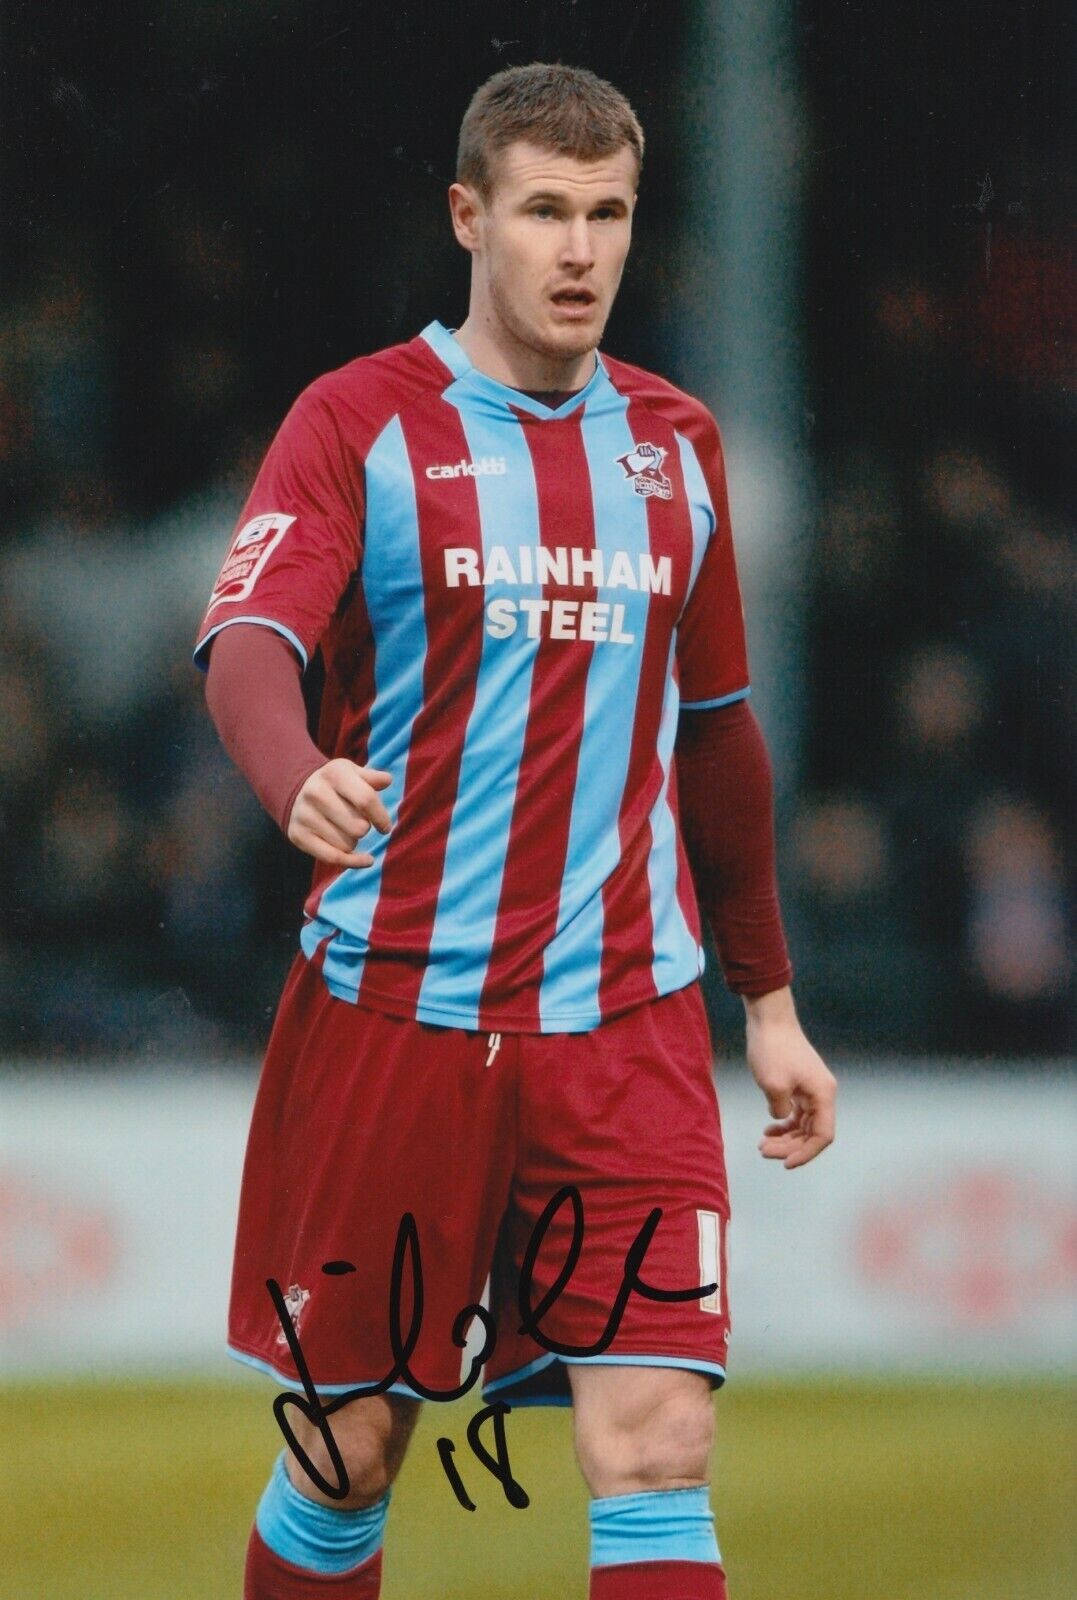 Michael O'Connor Hand Signed 12x8 Photo Poster painting - Scunthorpe United Autograph 1.